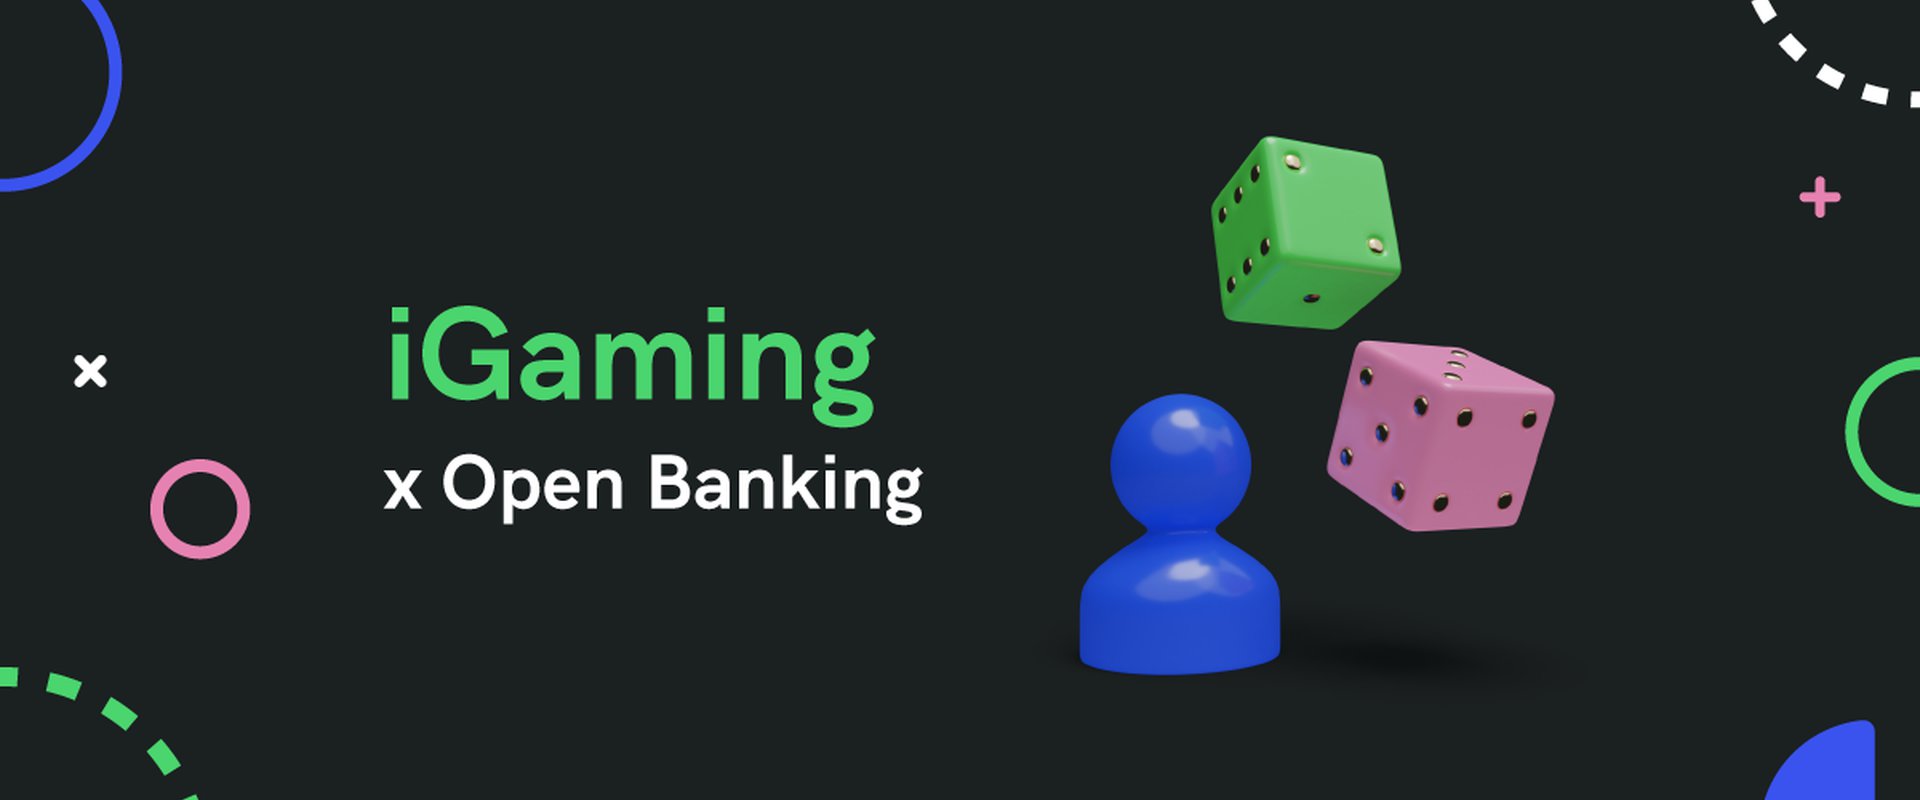 How iGaming uses open banking